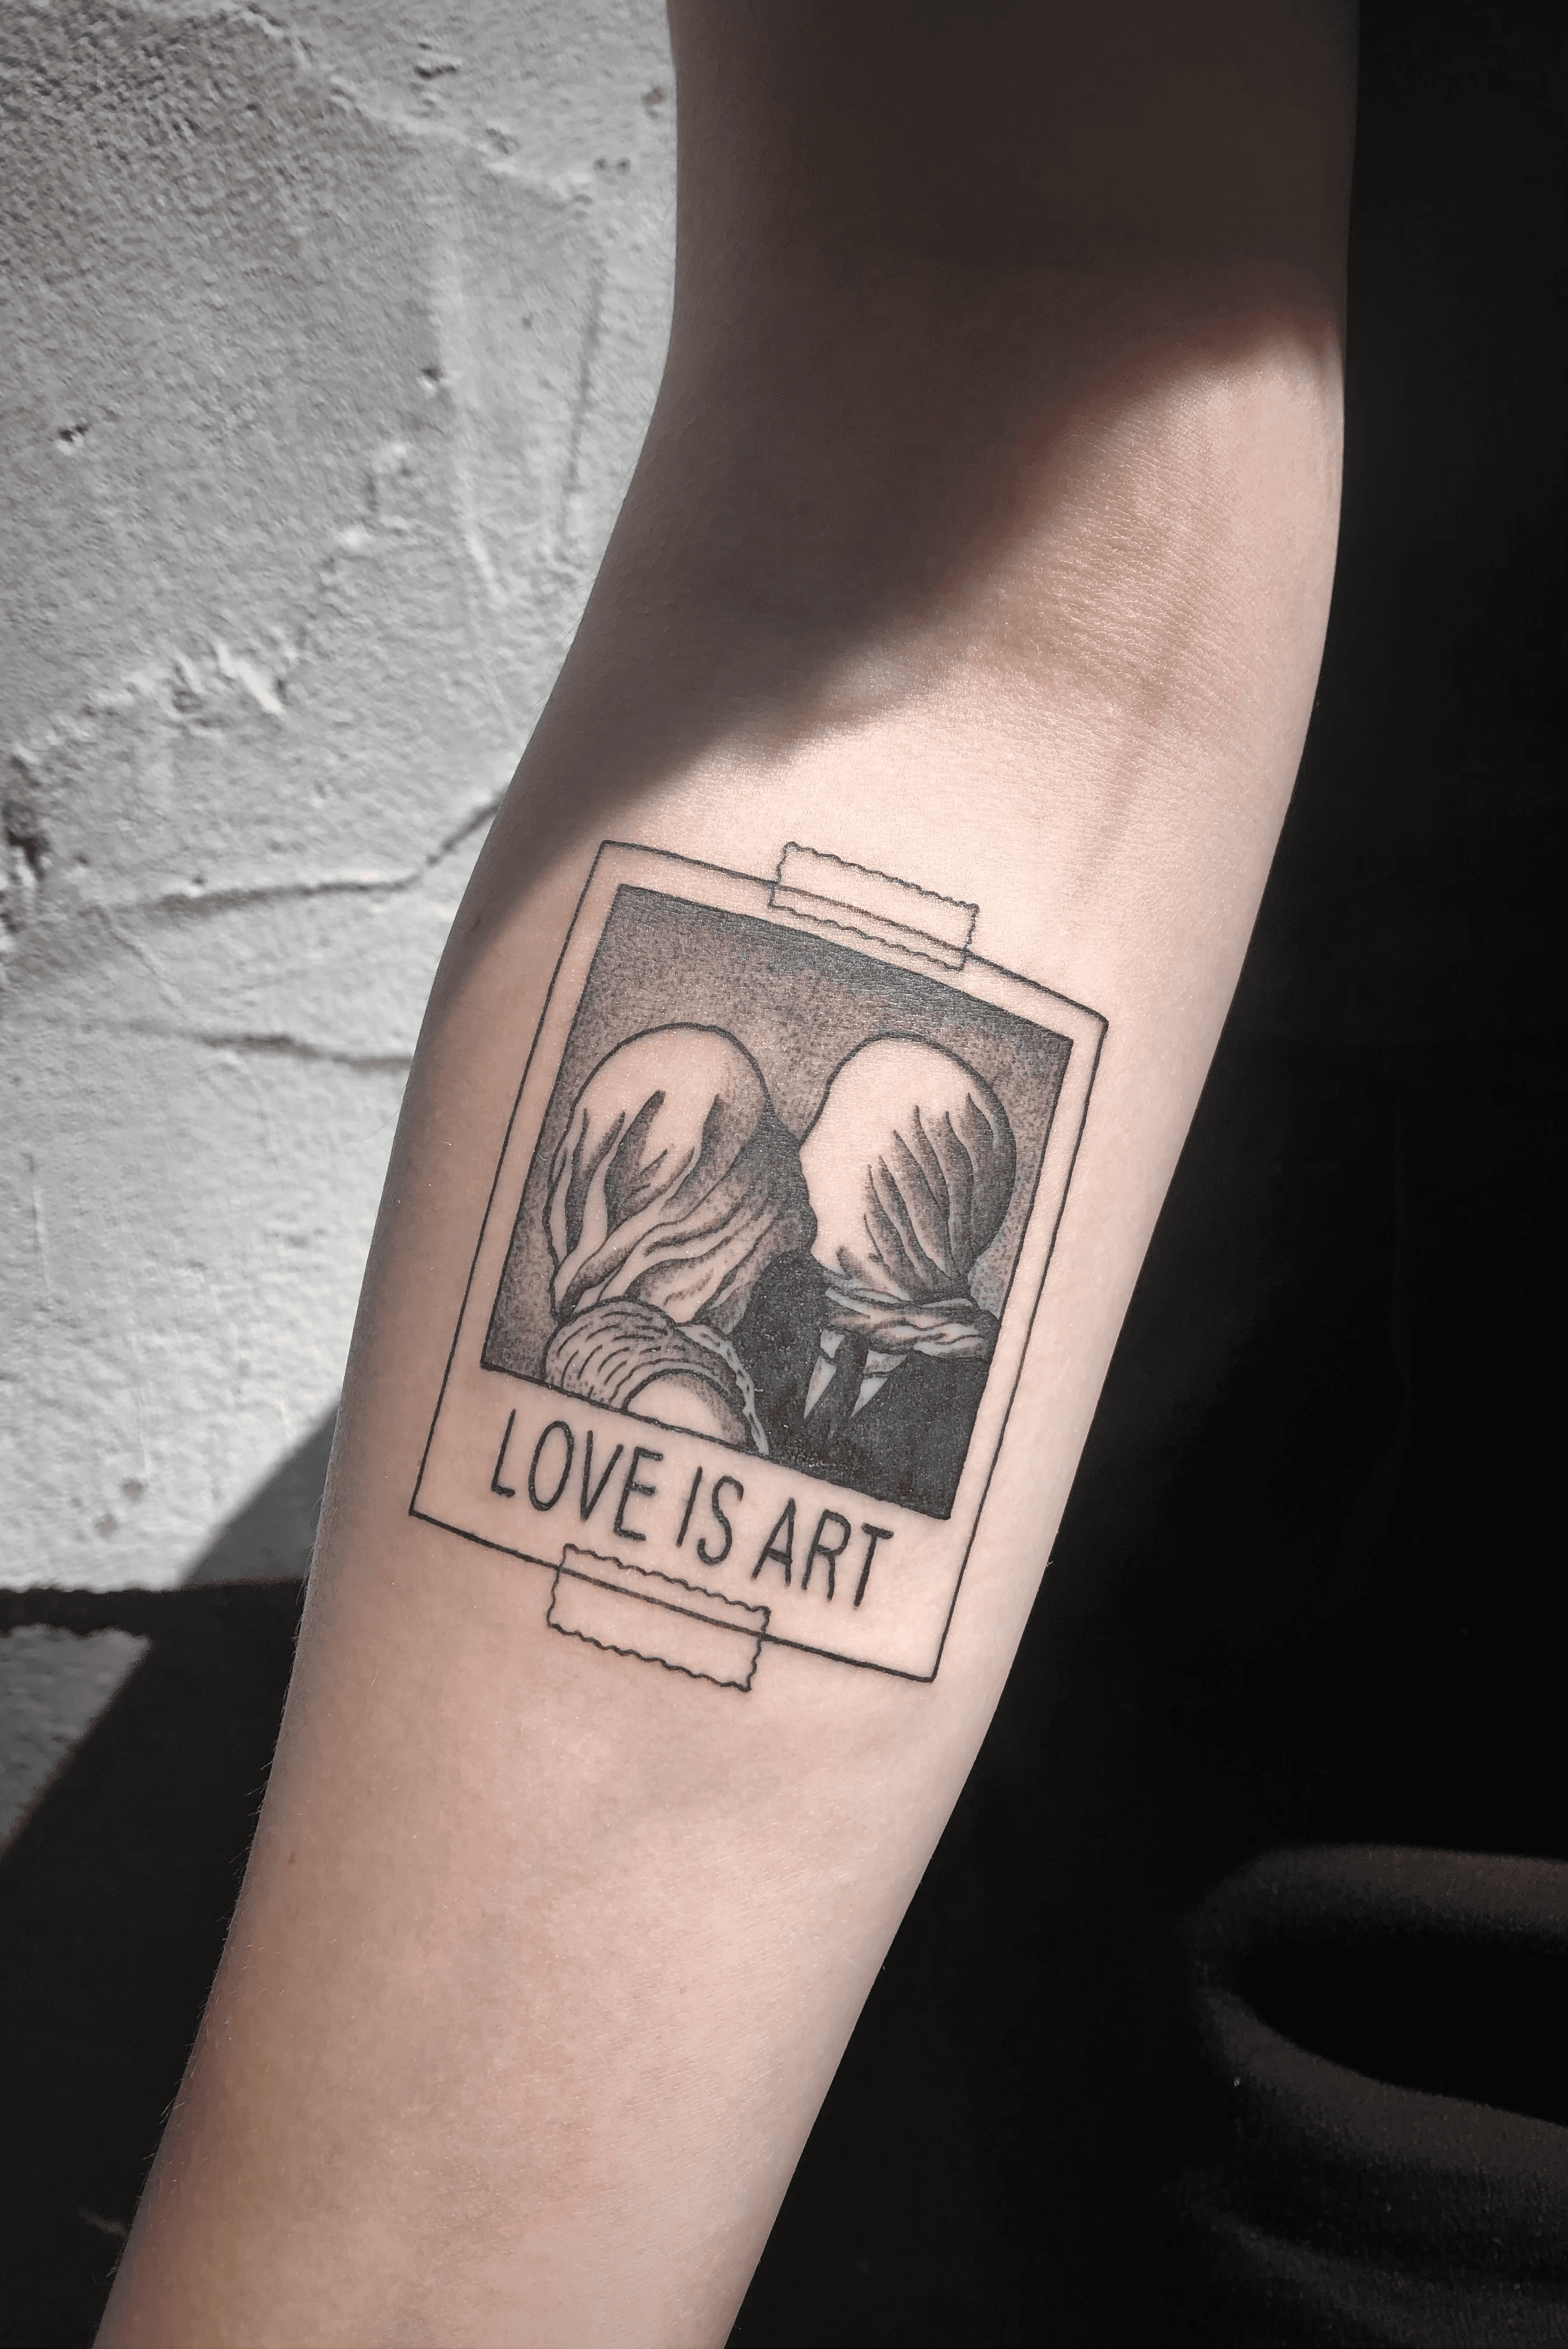 Tattoo based on The Lovers by Rene Magritte  rtattoo